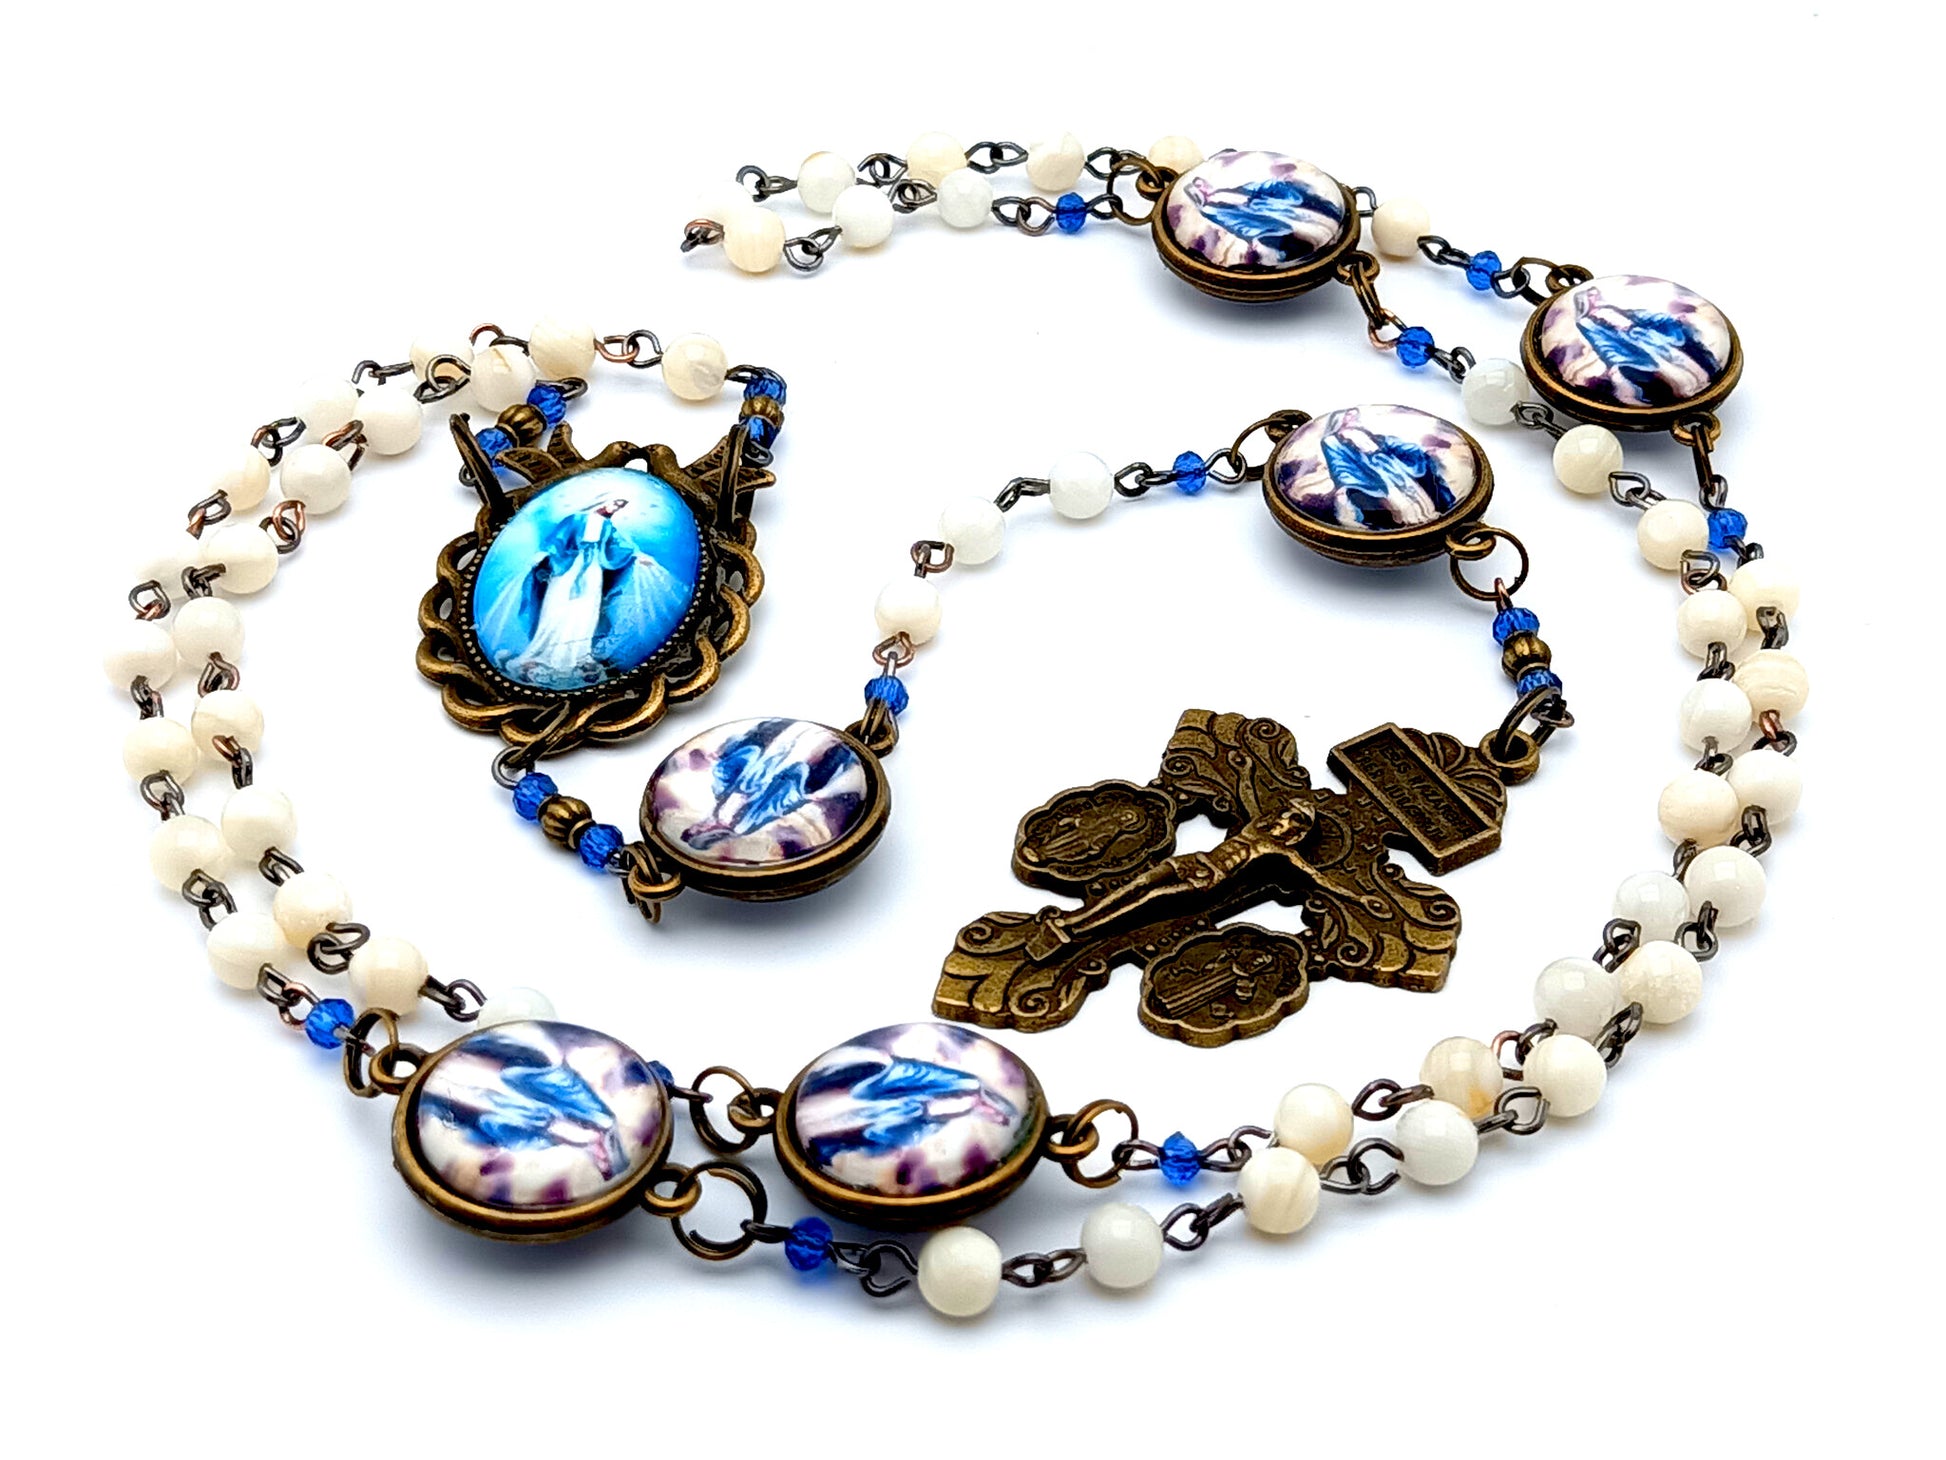 Our Lady of Grace unique rosary beads with vintage style mother of pearl beads with Saint Michael and Miraculous medal brass crucifix.